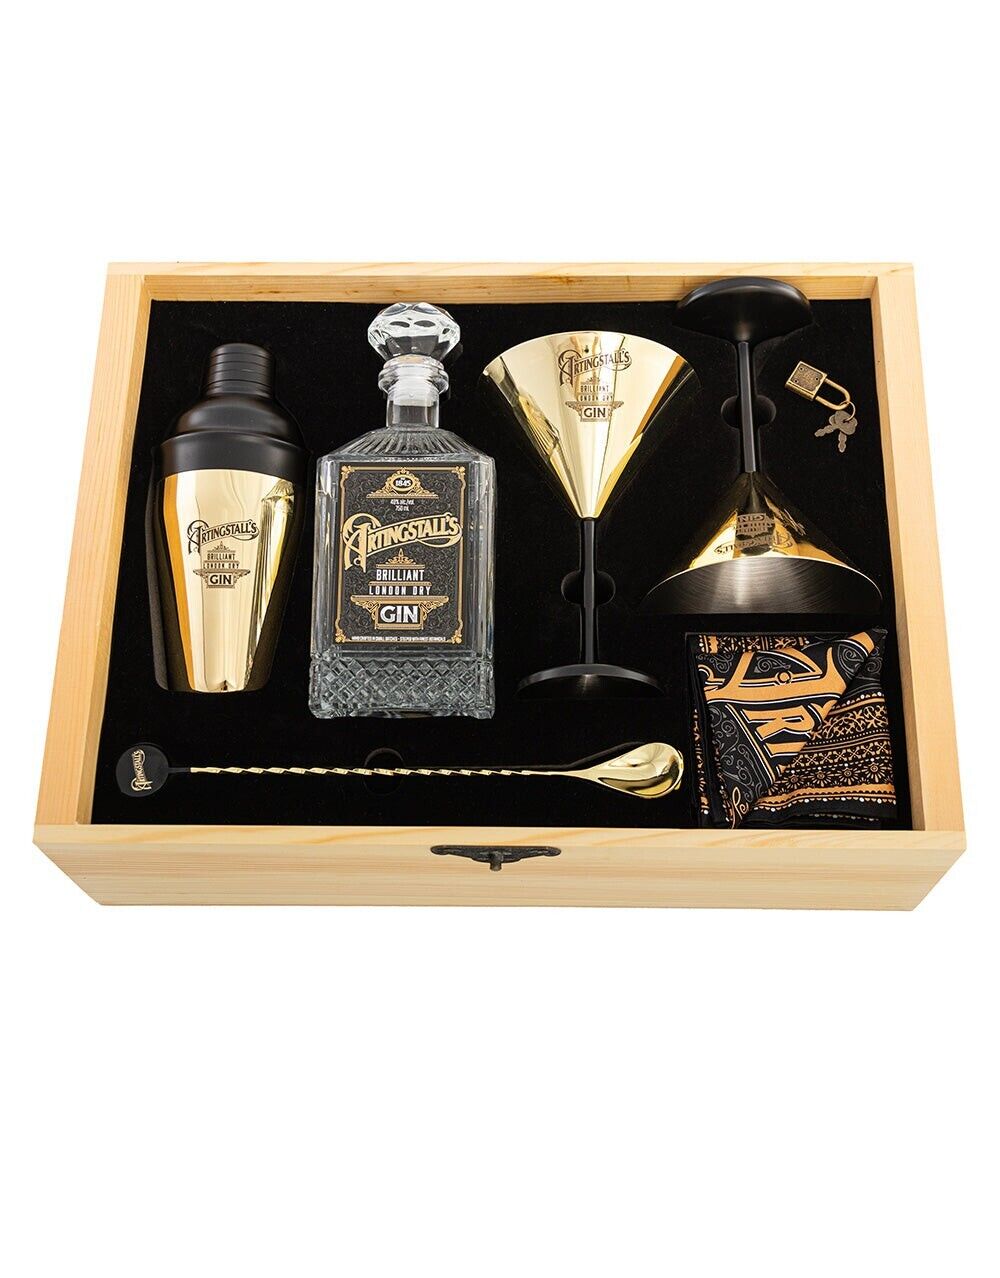 Artingstall\'s Gin Box Gift Set Without The Gin Bottle New 